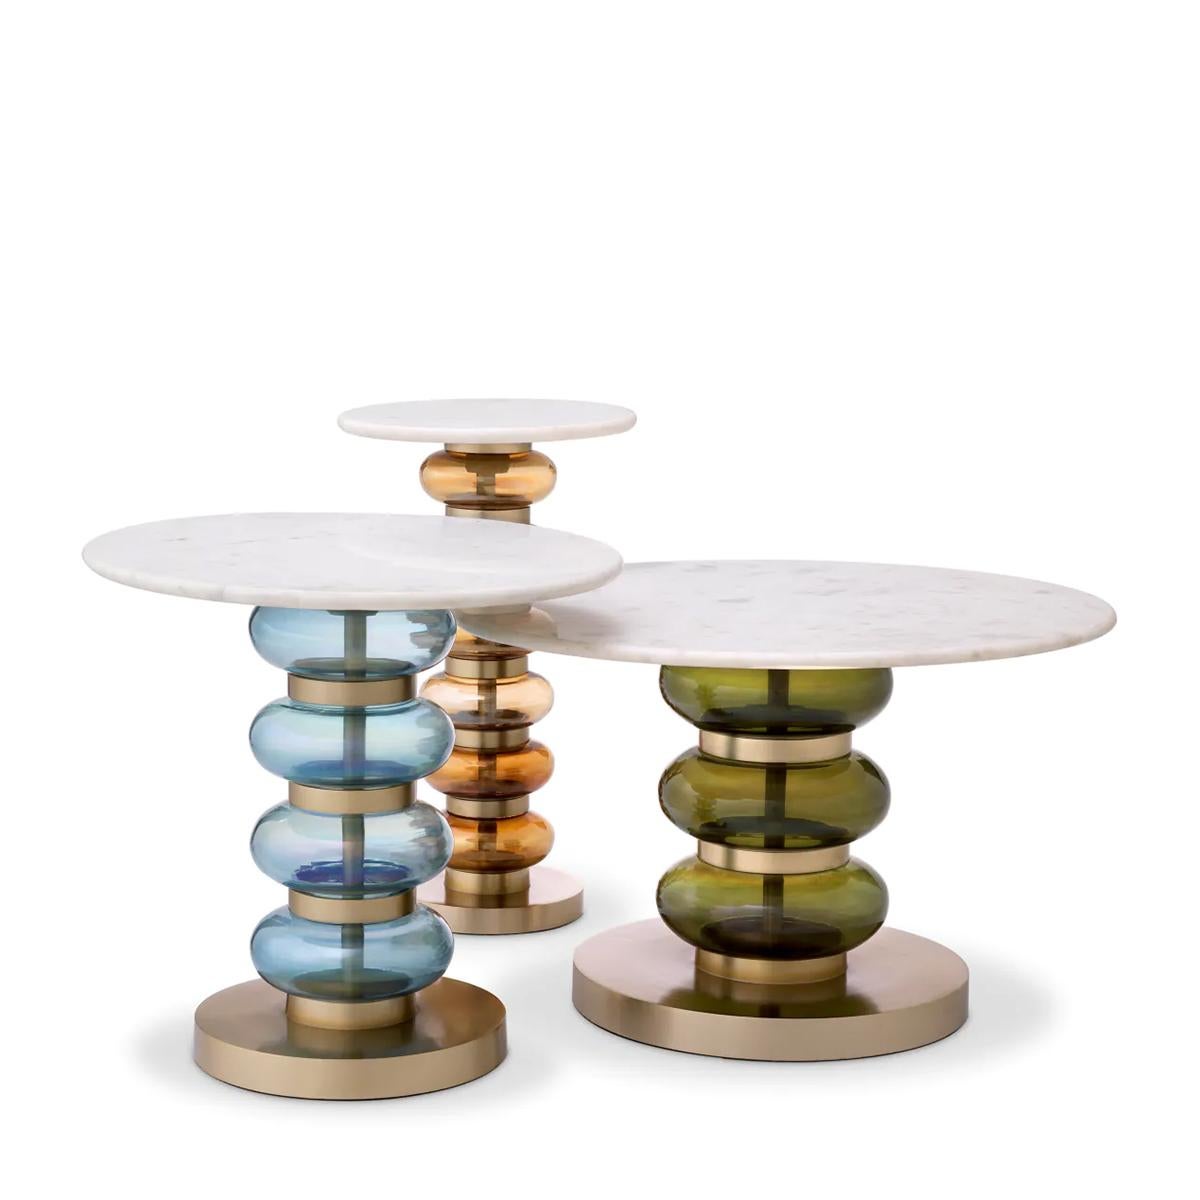 Side Table Bubbles Set of 3 with solid brass in vintage finish,
composed of 3 side tables in orange and blue and green glass,
with white marble table top. dimensions of each:
A/ Diameter61xH40cm.
B/ Diameter46xH44,5cm.
C/ Diameter30xH54cm.

